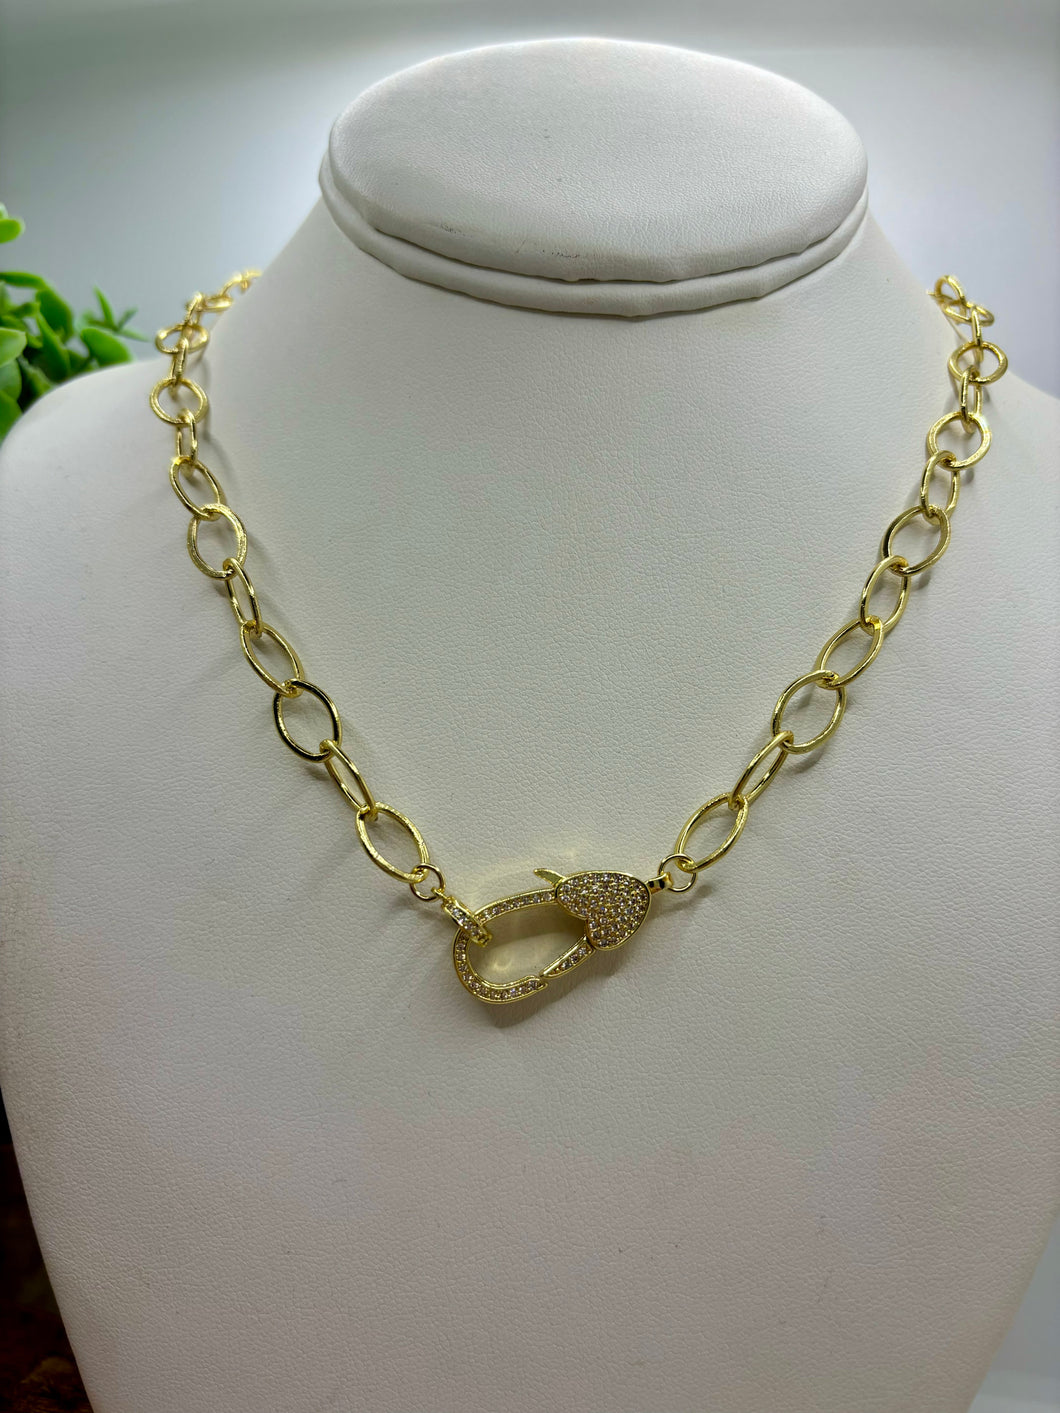 Heart clasp necklace